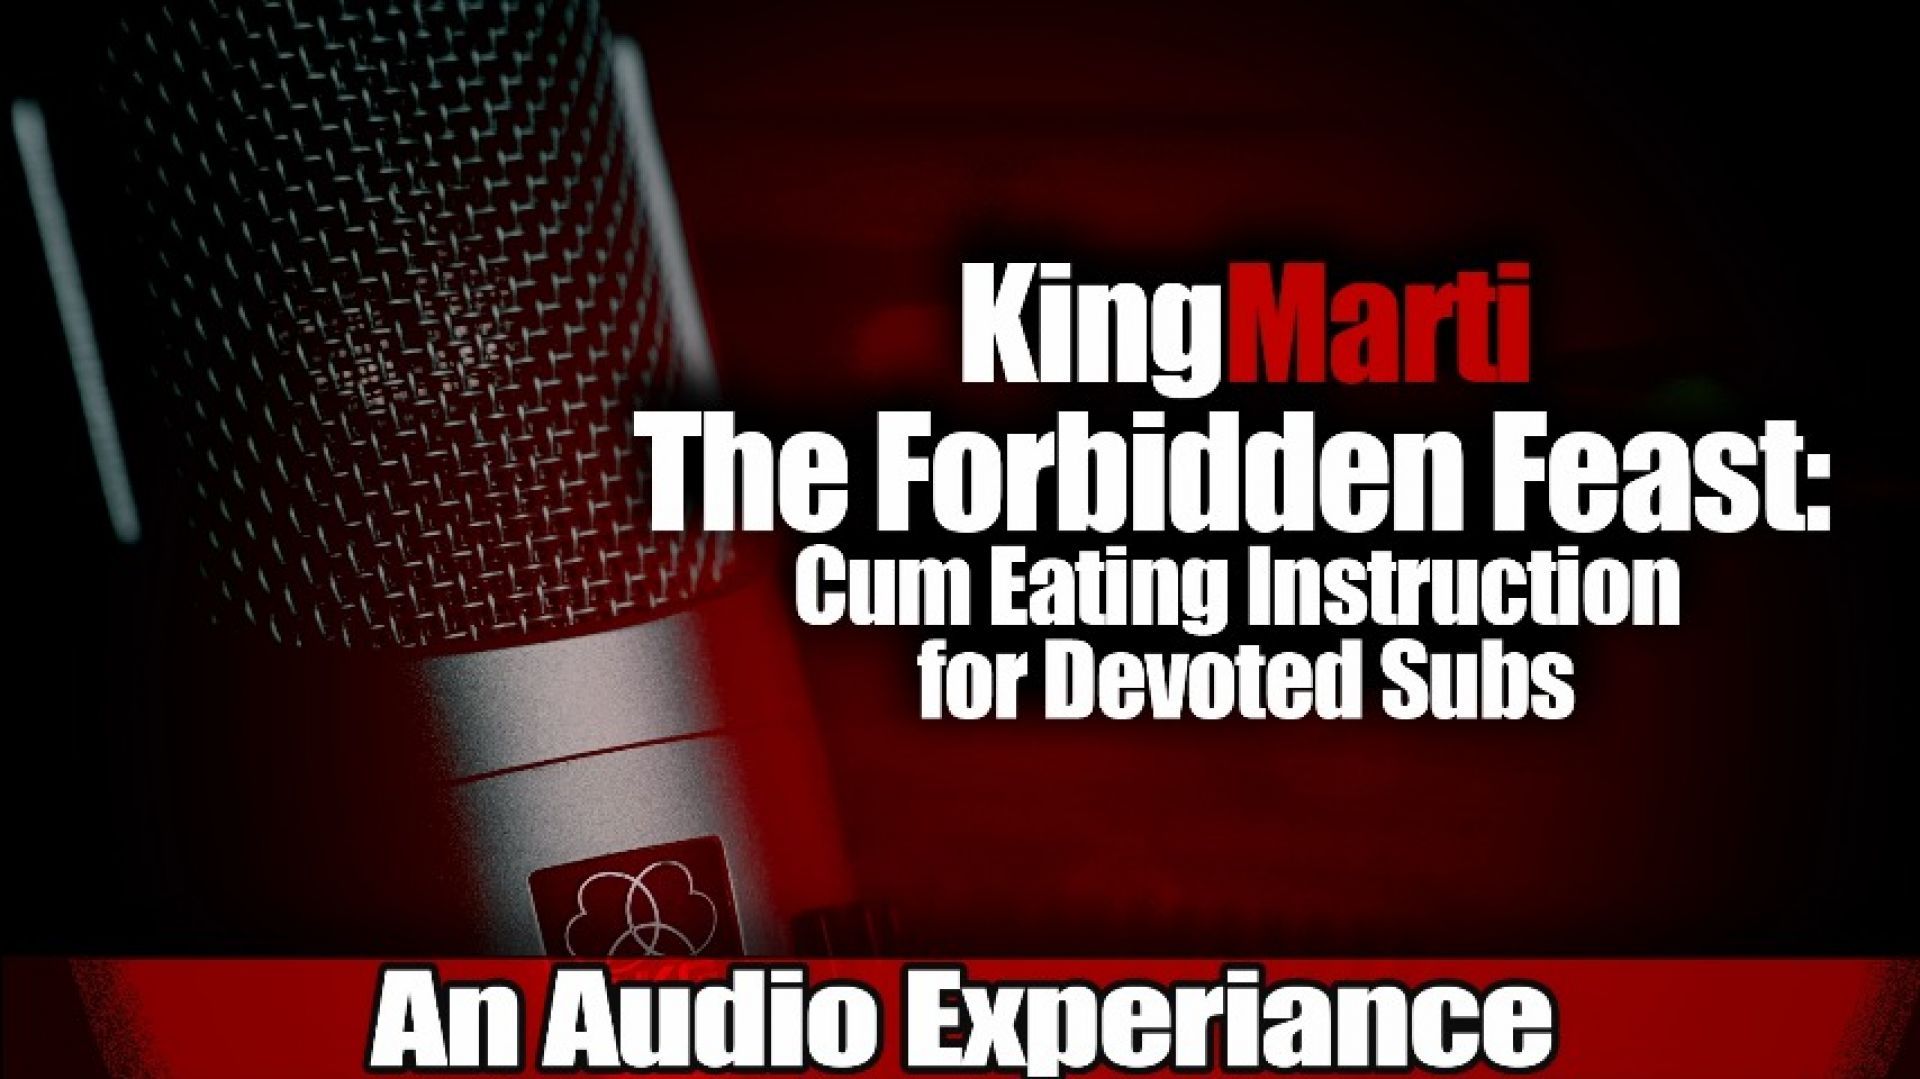 The Forbidden Feast: Cum Eating Instruction for Devoted Subs